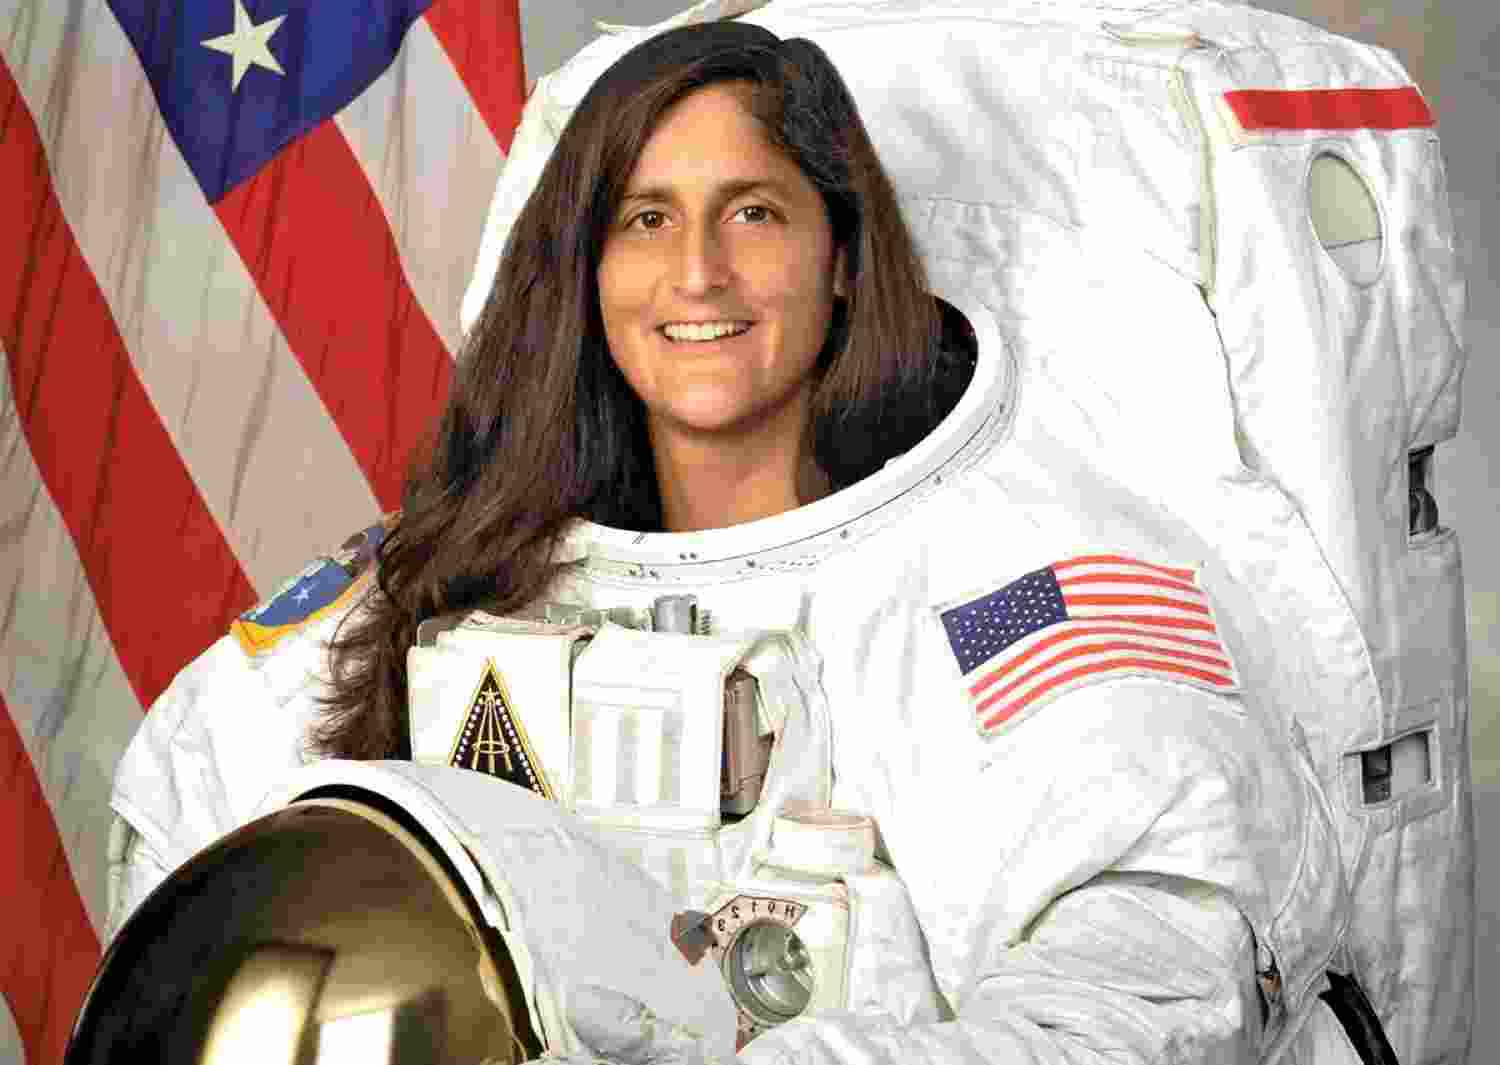 Boeing Starliner: Sunita Williams' 3rd space mission called off due to technical glitch